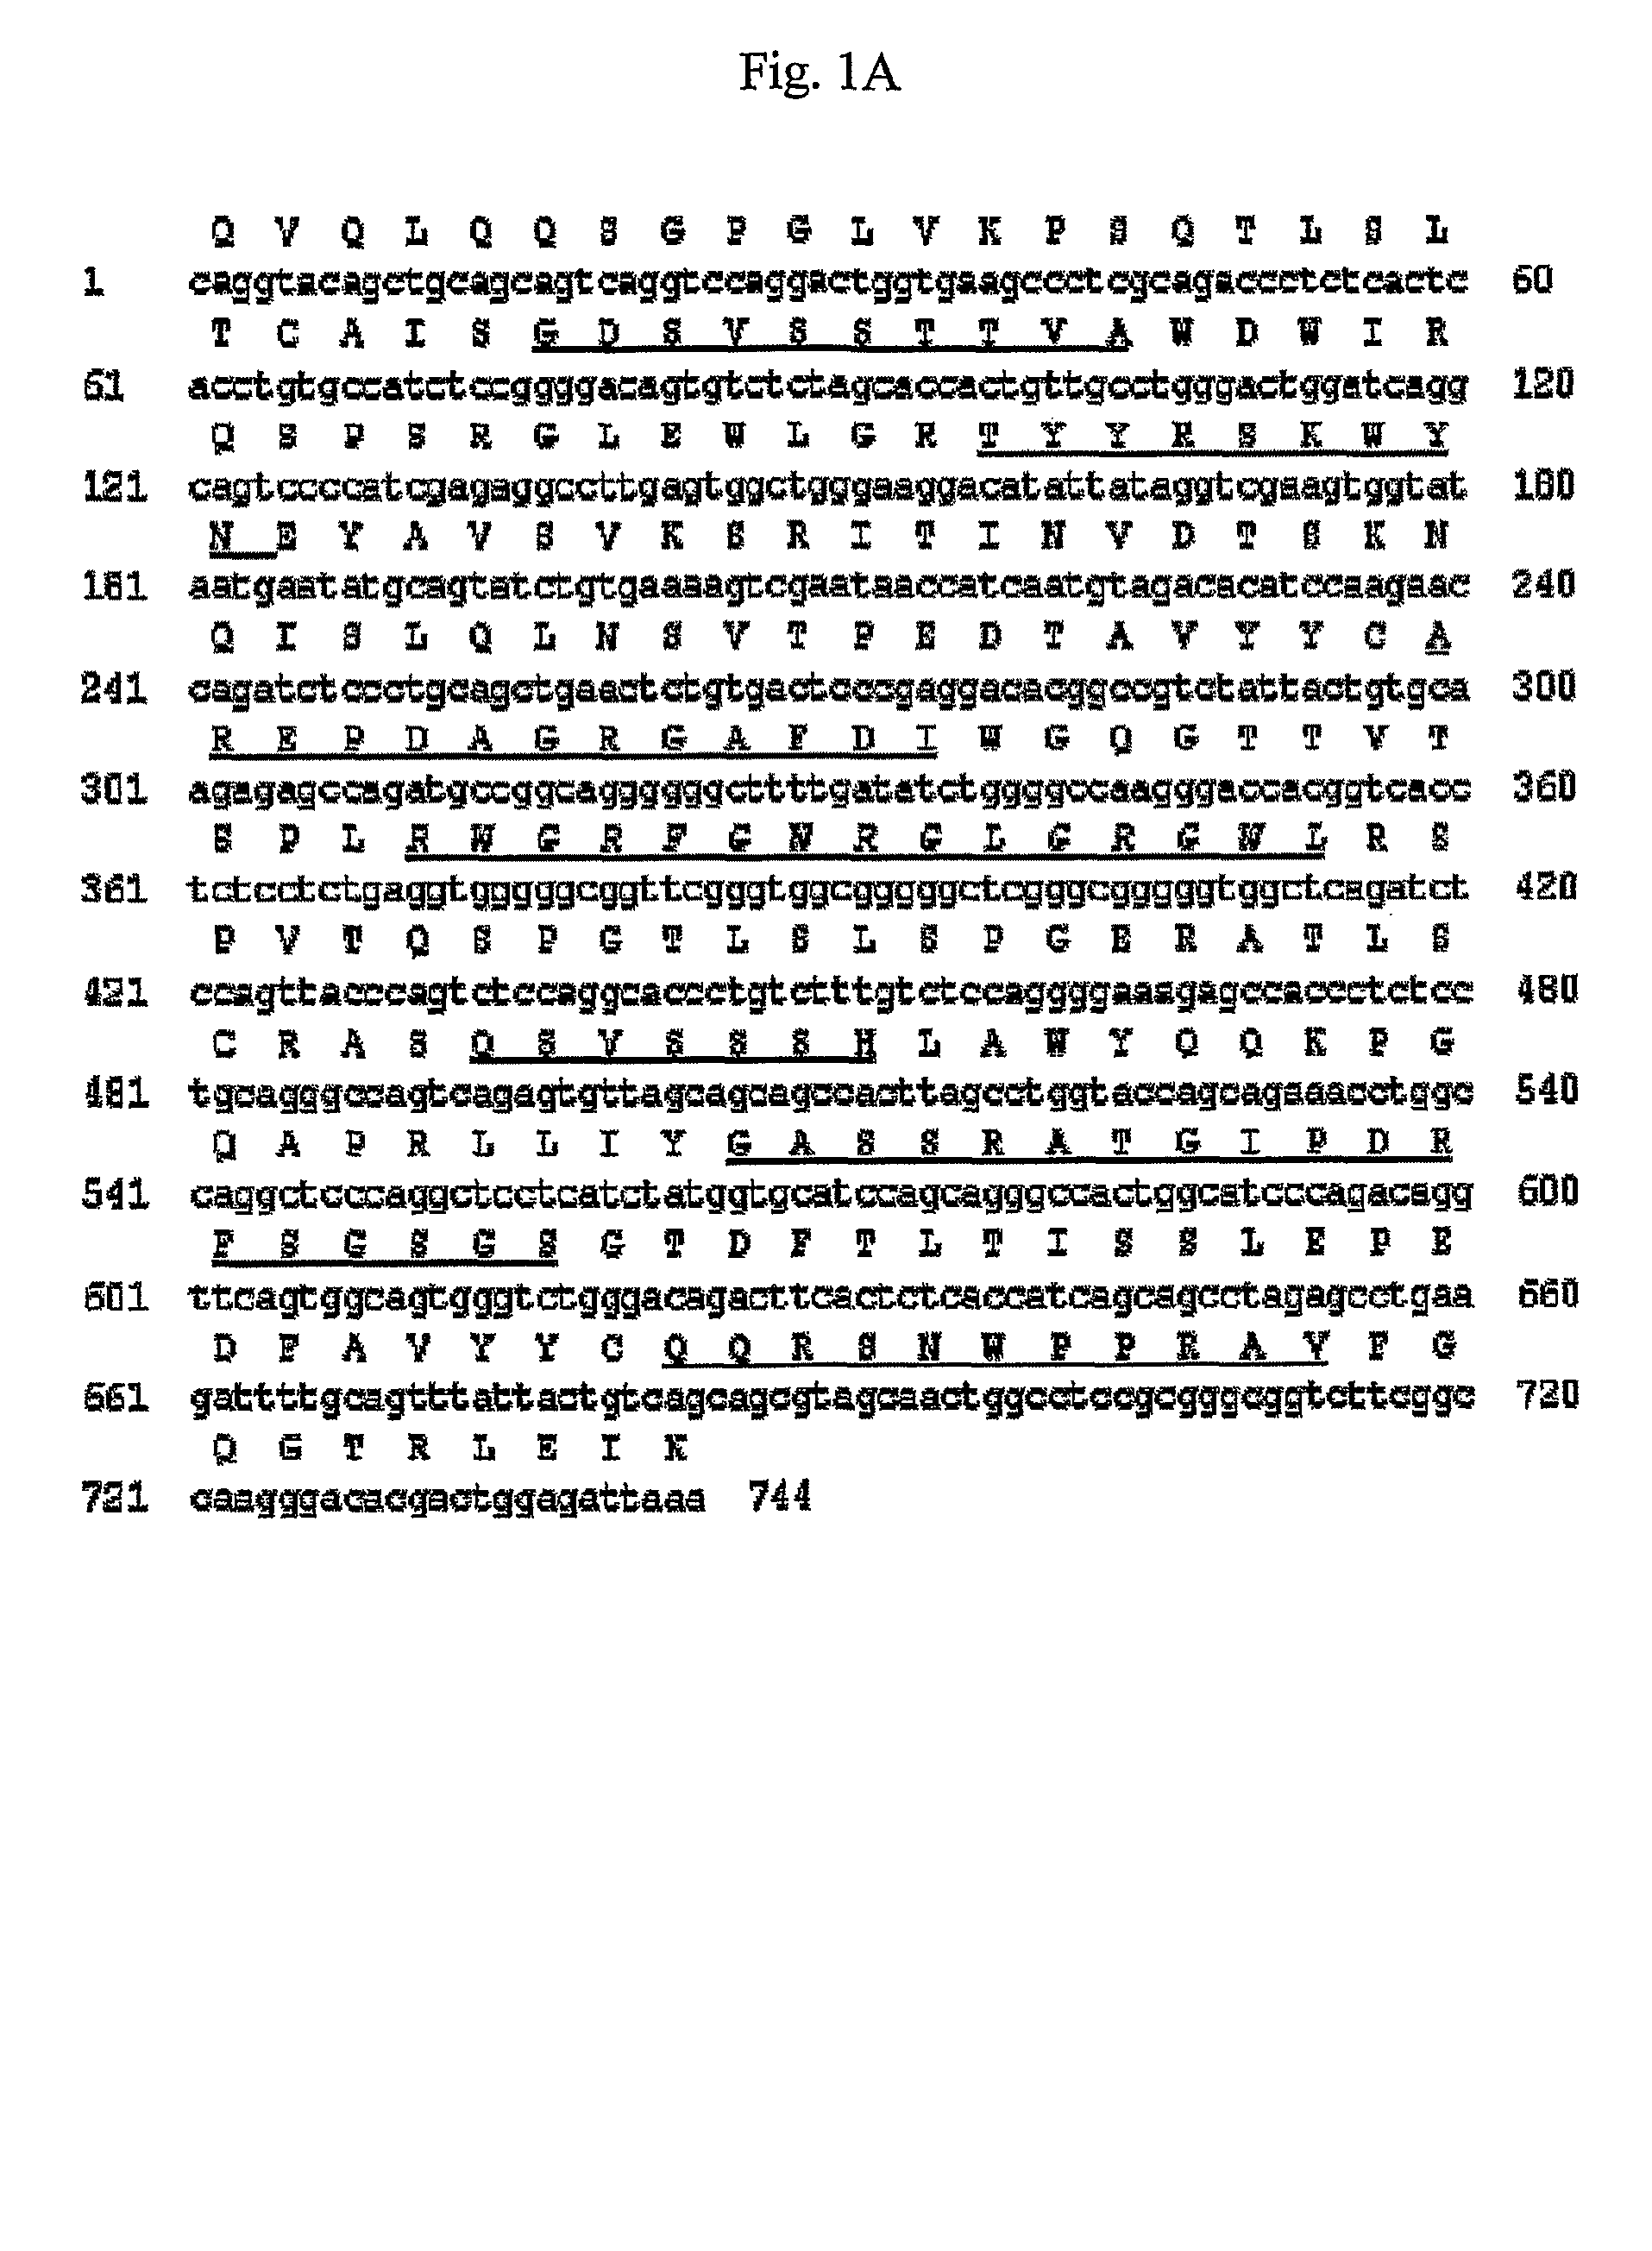 Antibody specifically binding to DR5 and composition for preventing or treating cancers comprising the same